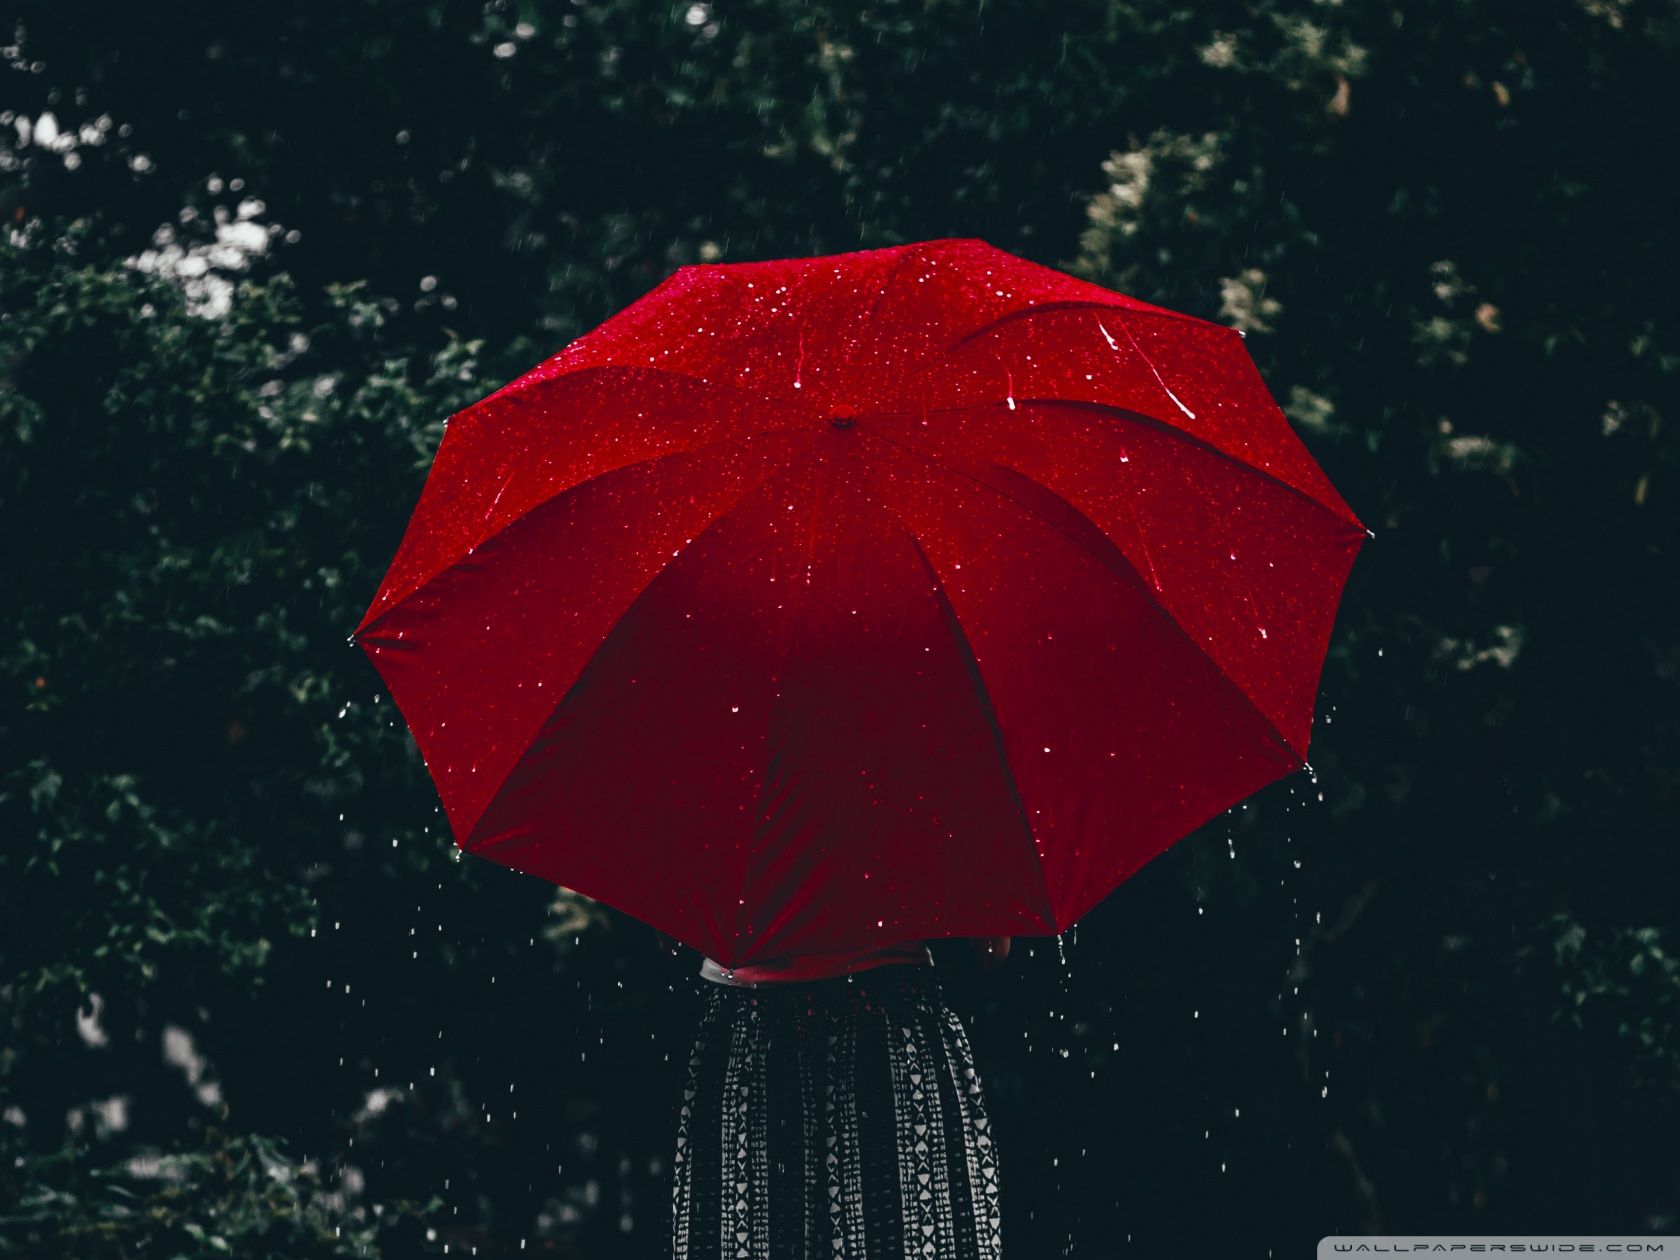 A woman holding a red umbrella with raindrops on it - Rain